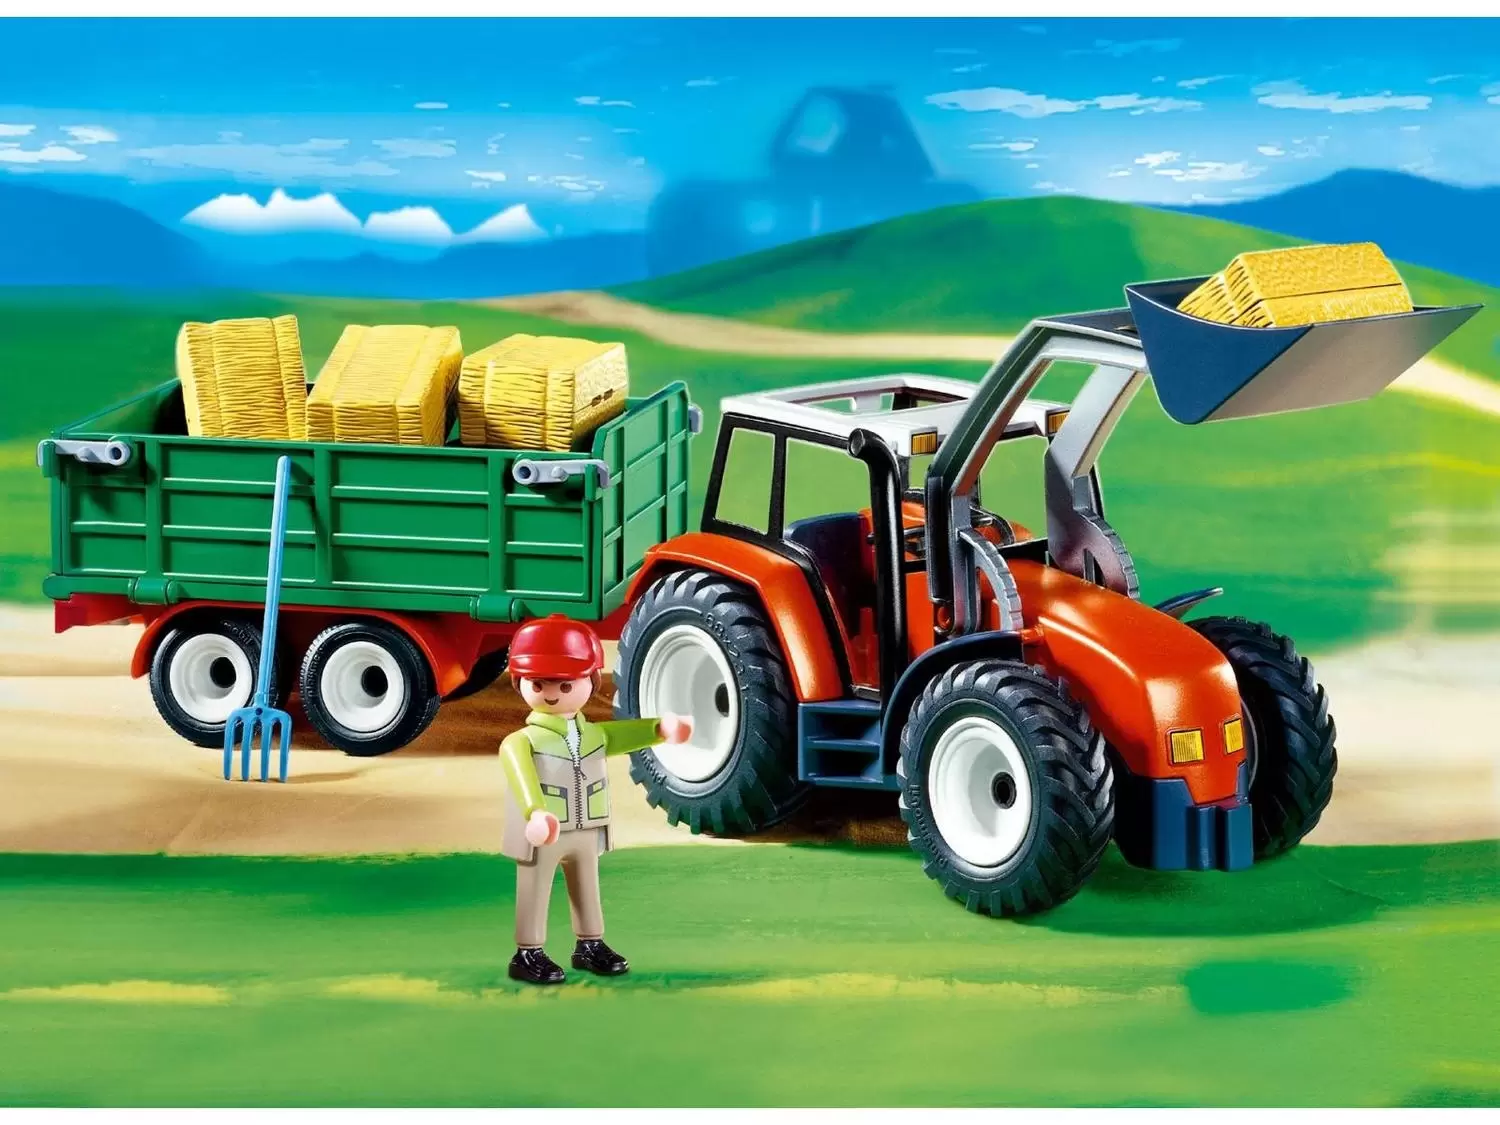 PLAYMOBIL 4897 - Country - Ferme Transportable - Exclusivite